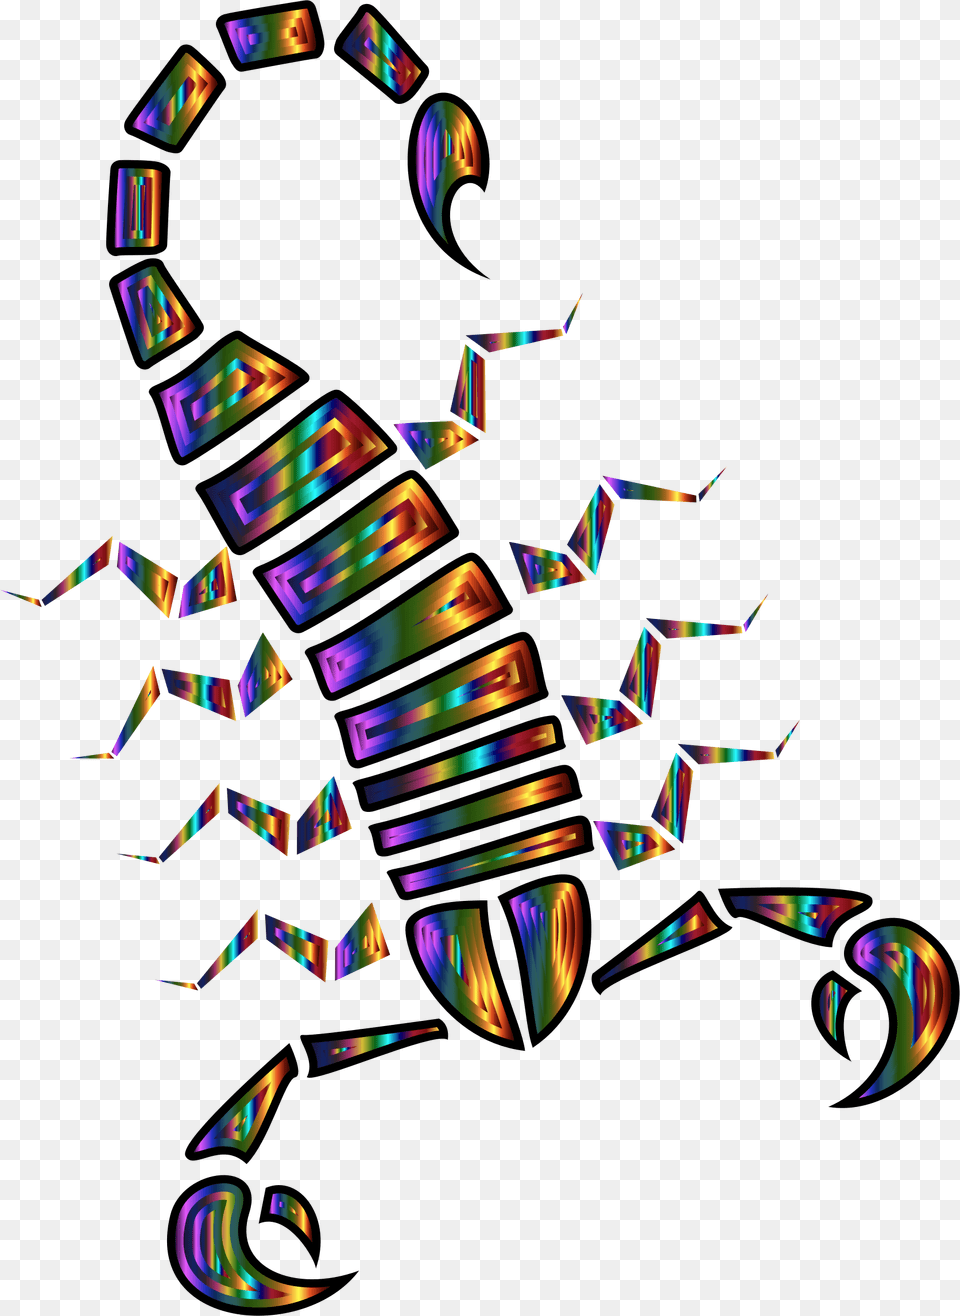 Colorful Abstract Tribal Scorpion 6 Clip Arts Scorpion And Abstract, Art, Graphics, Paper, Pattern Free Transparent Png